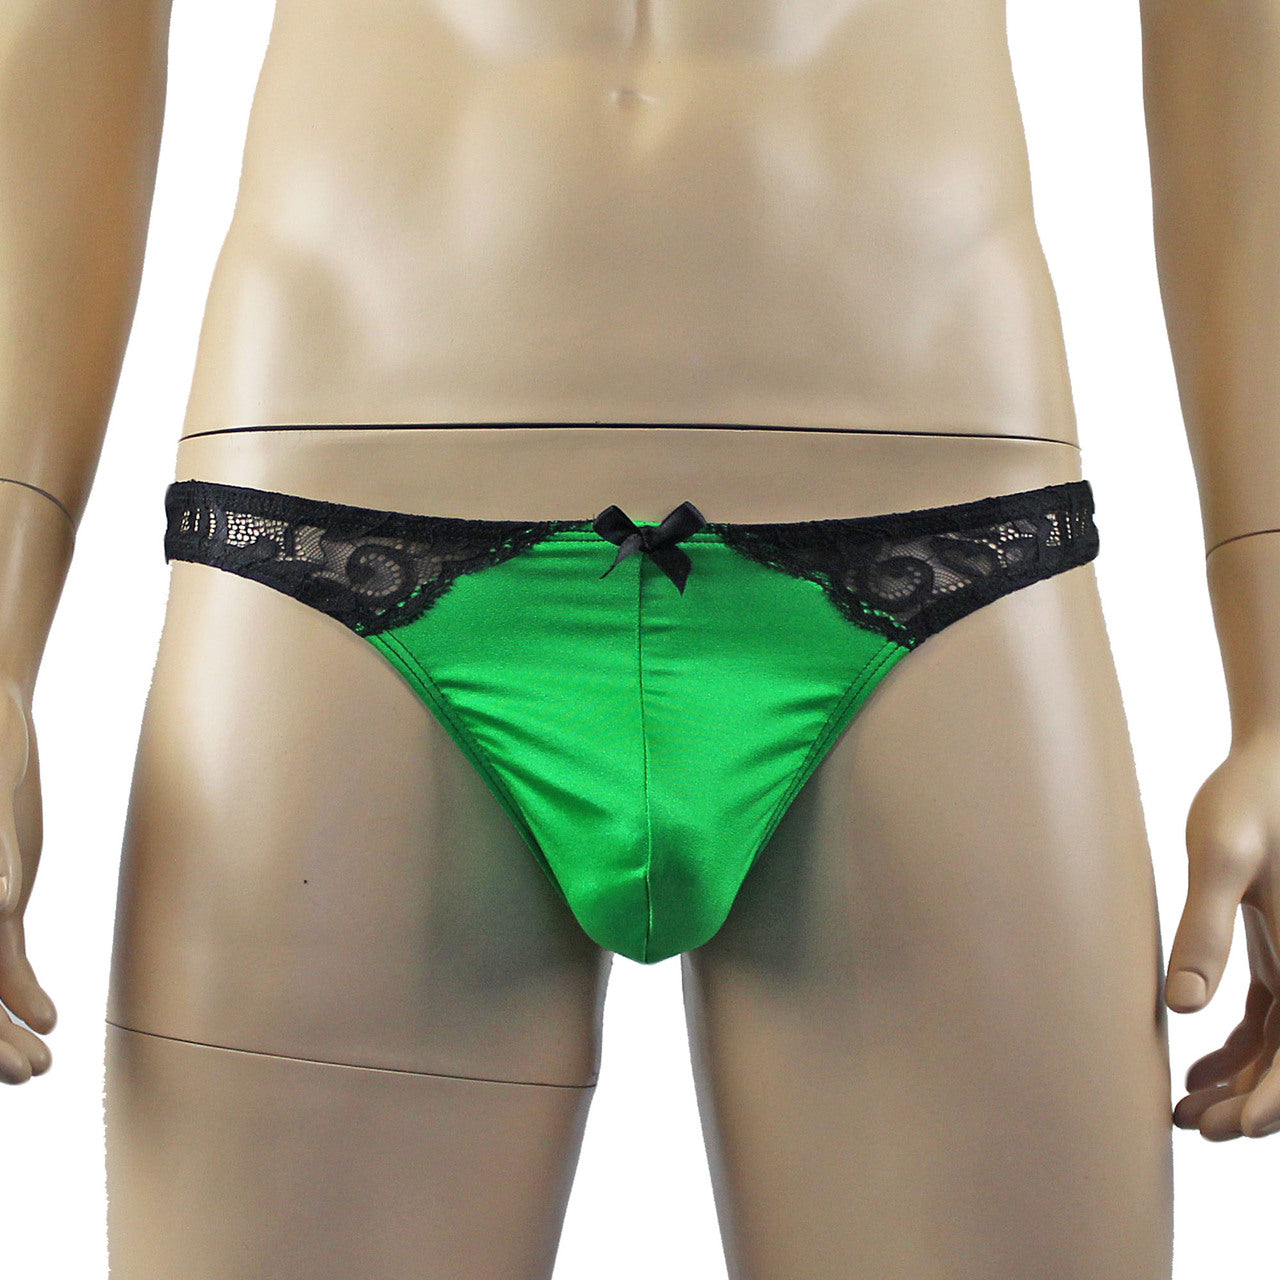 Mens Risque Bra Top and Thong Green and Black Lace